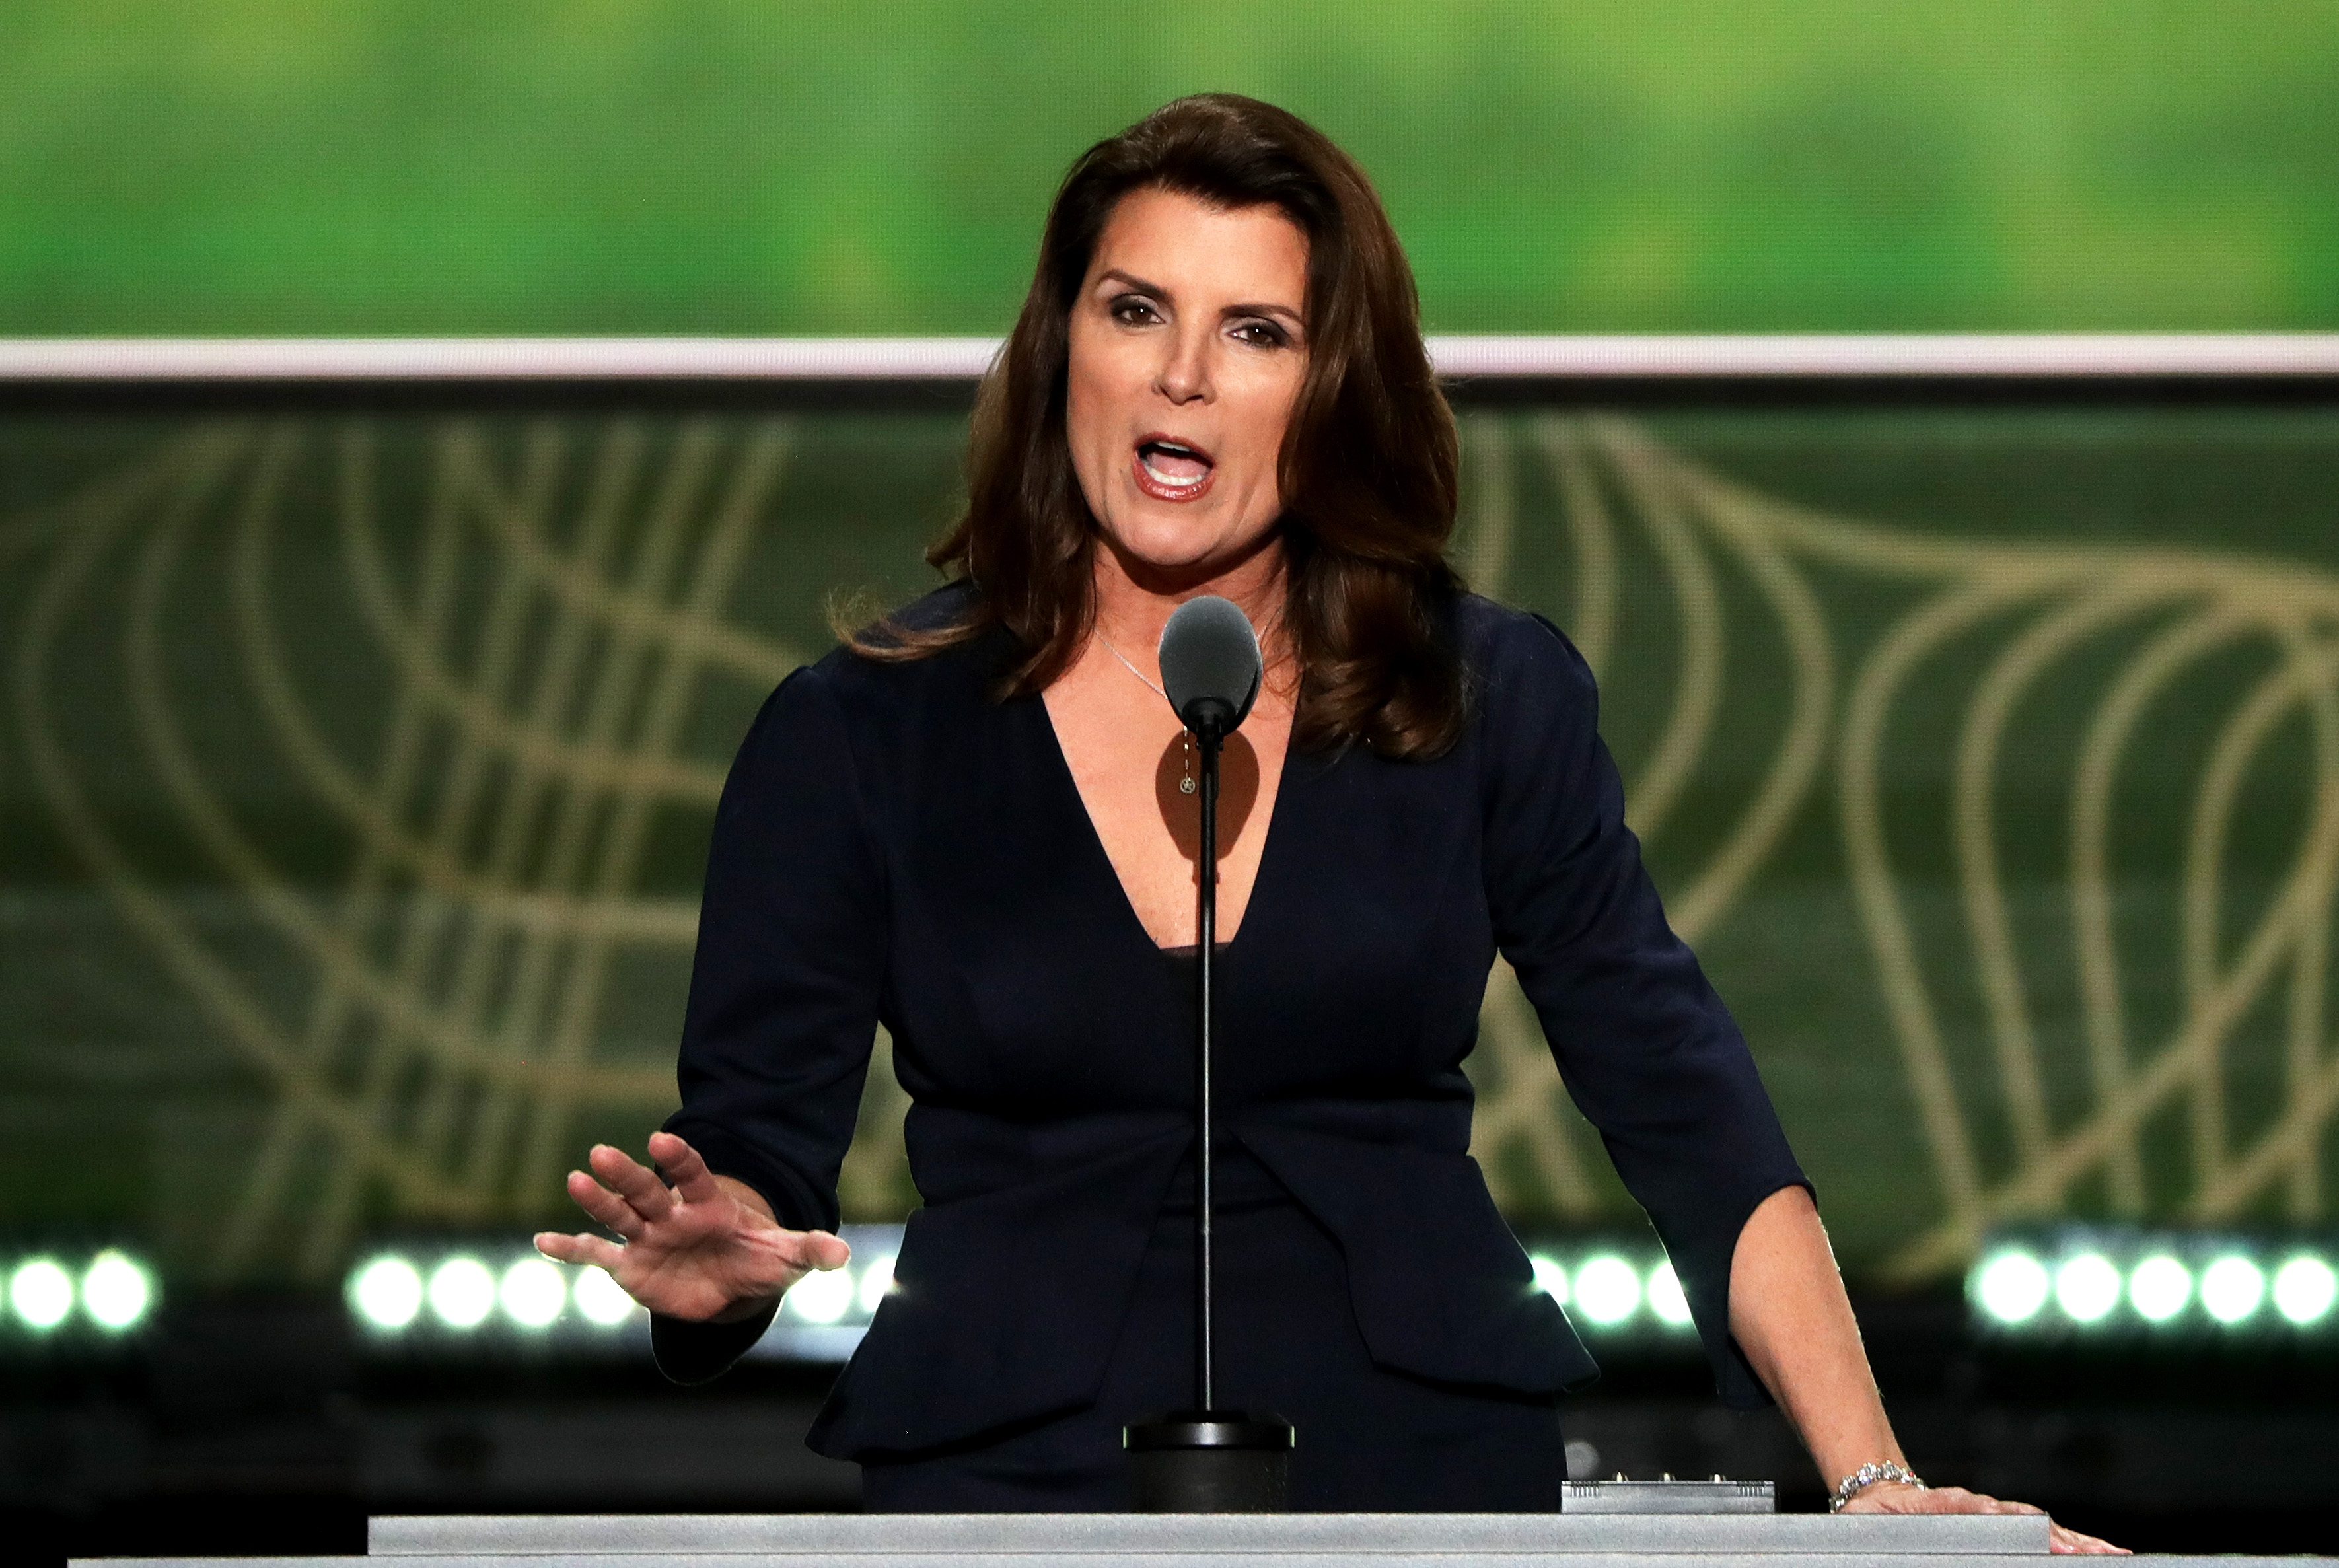 'The Bold and the Beautiful' actor Kimberlin Brown wearing a navy blue suit, and speaking into a microphone.